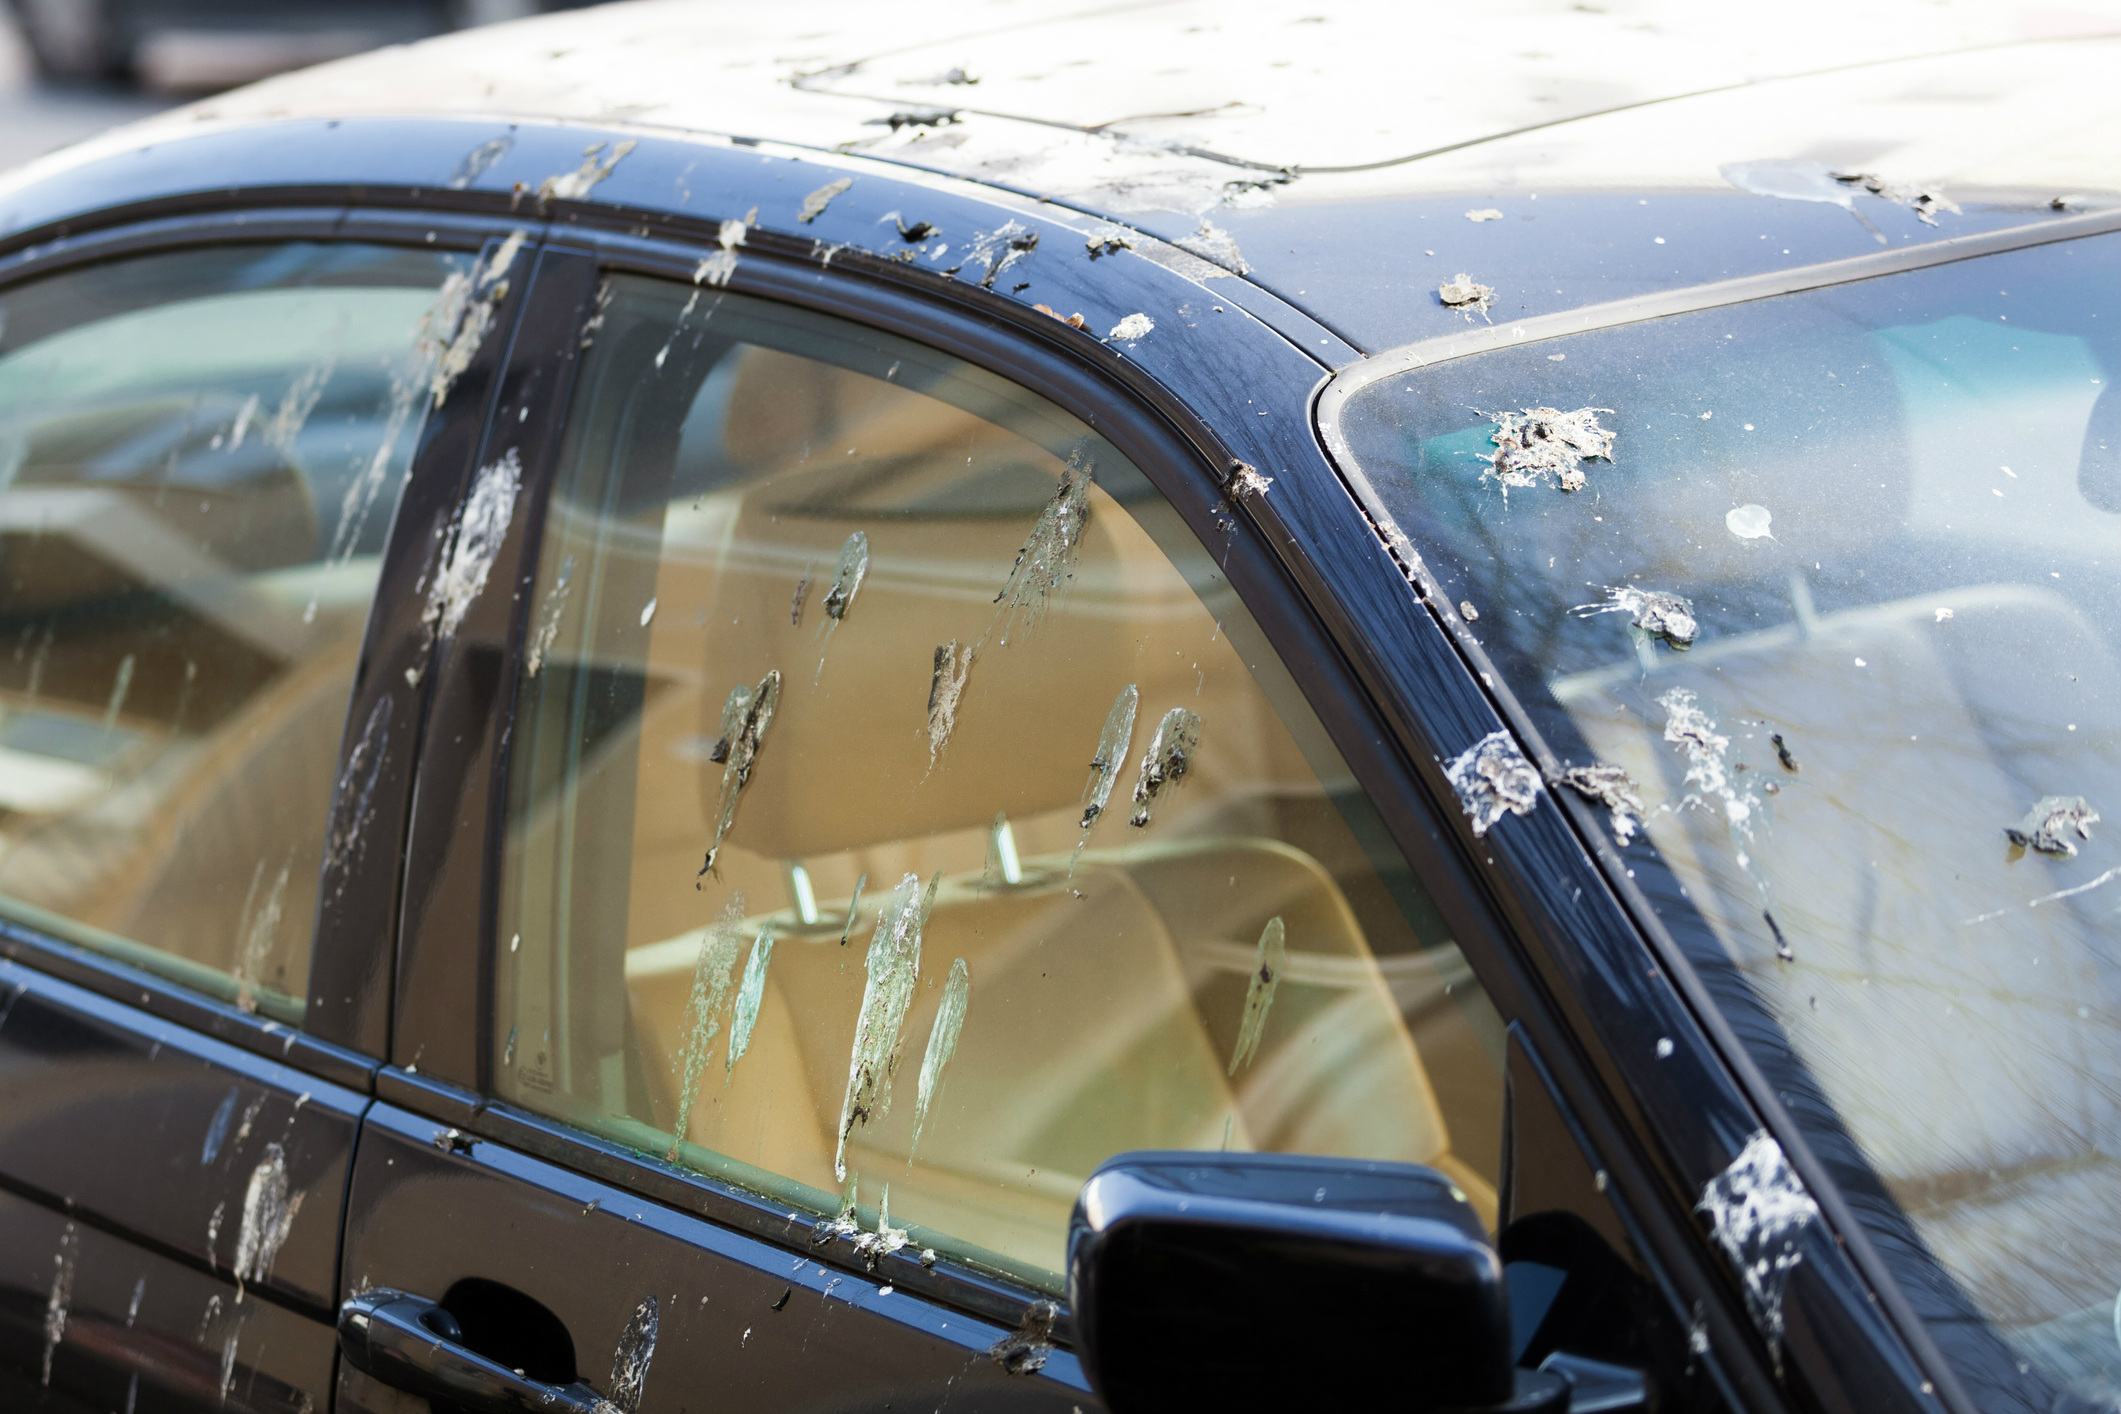 Which country considers it lucky to have bird droppings on a car?